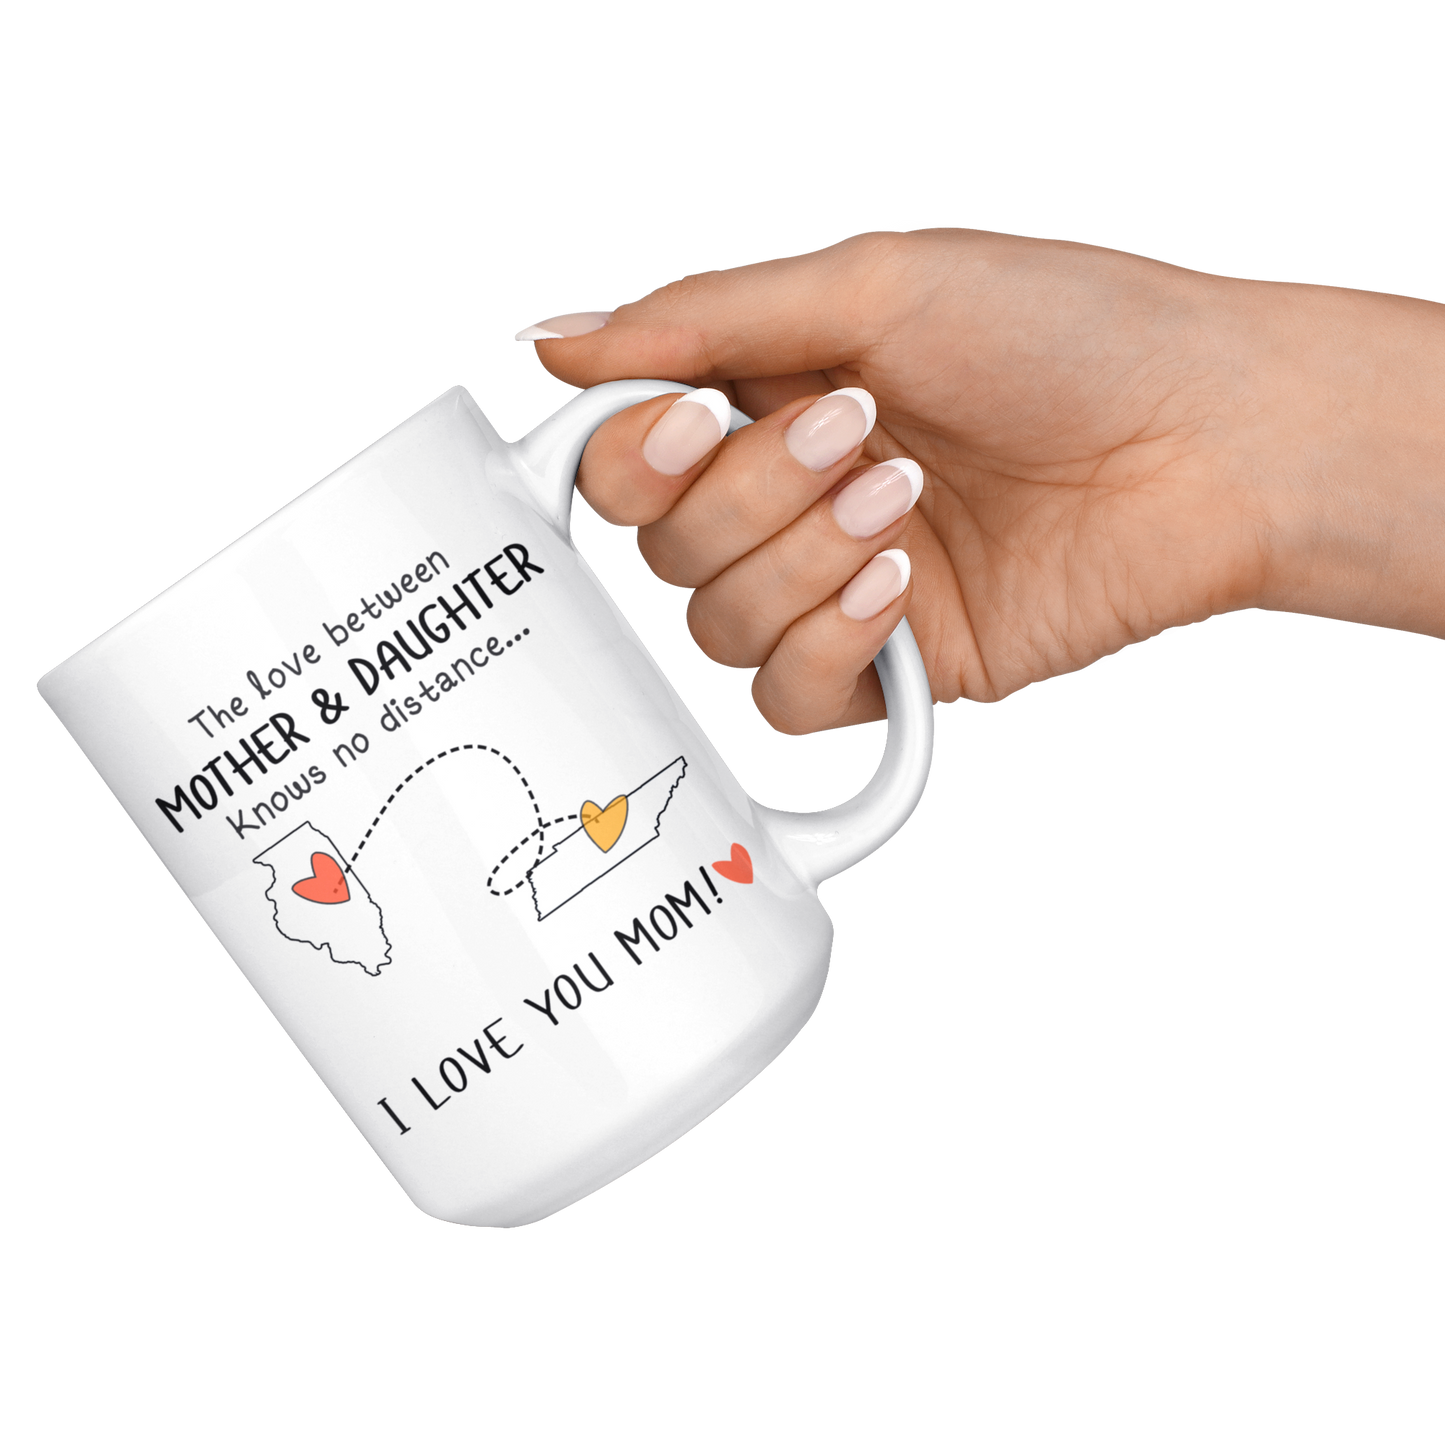 HNV-CUS-GRAND-sp-27225 - [ Illinois | Tennessee ] (mug_15oz_white) Mothers Day Gifts Personalized Mother Day Gifts Coffee Mug F